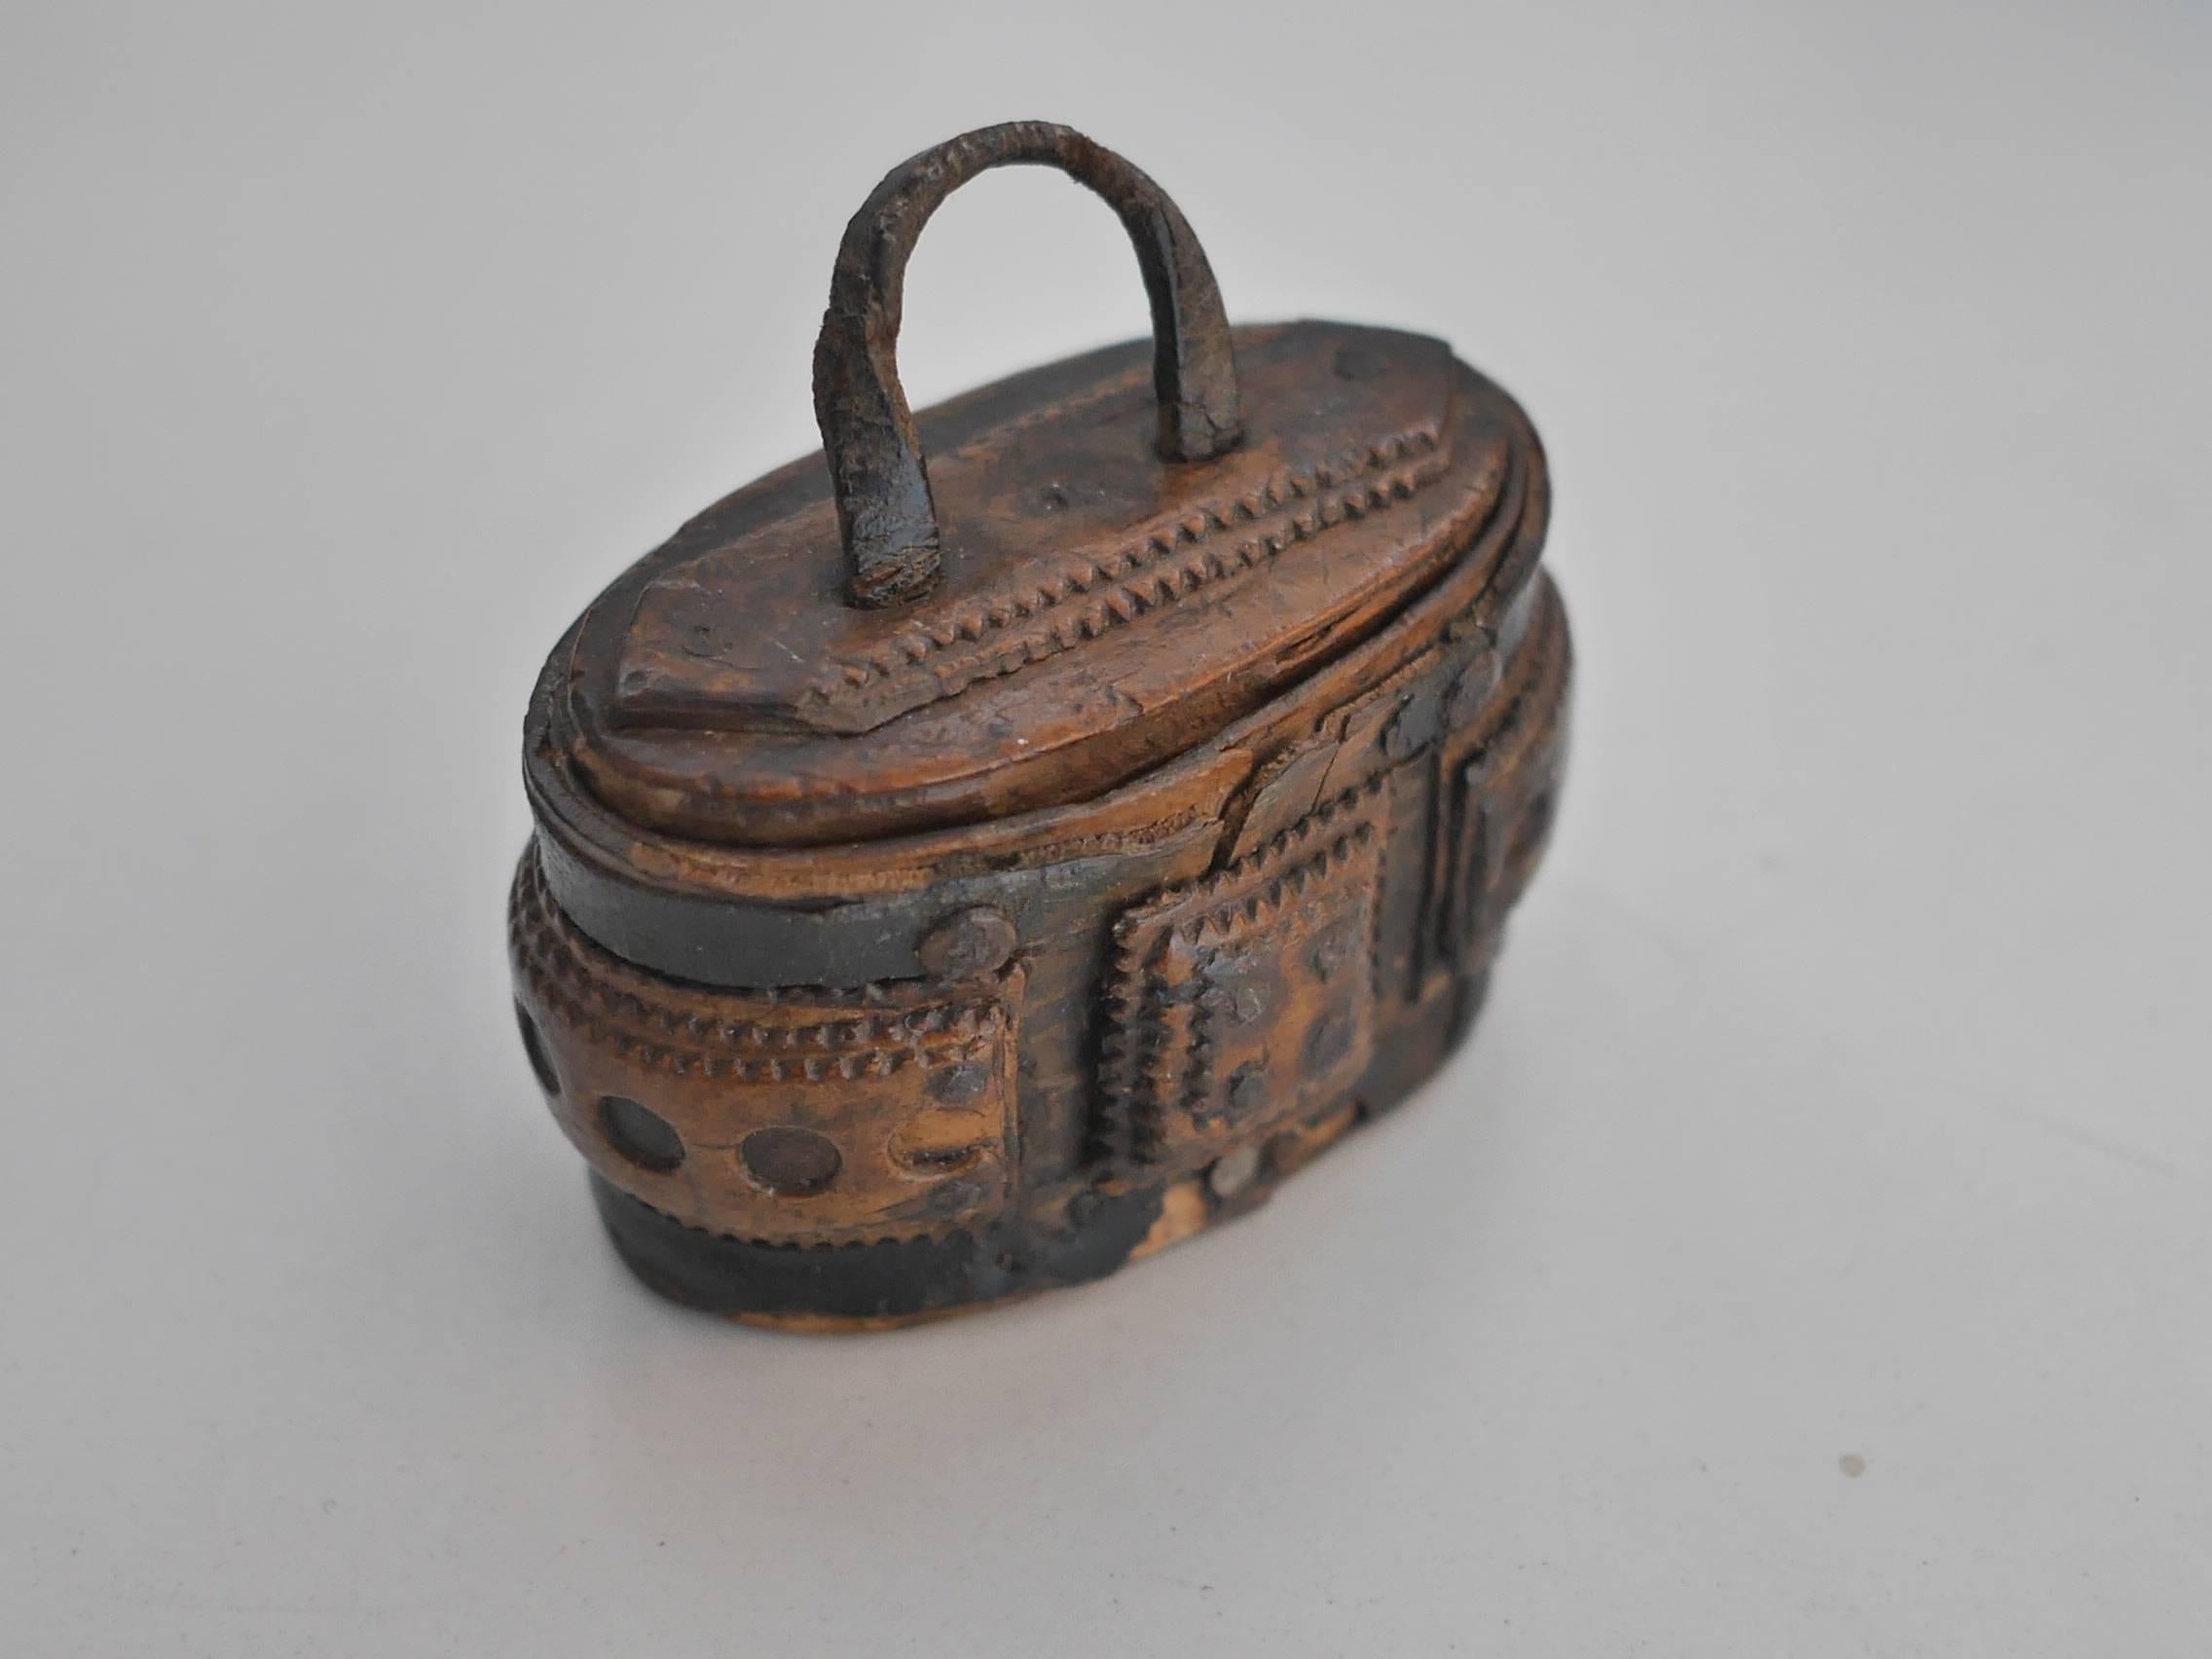 Beautifully decorated cork snuffbox with leather panels.

This is a typical Folk Art piece of work. Inhaling snuff, or snuffing, as it is also called, was first witnessed by a European missionary in 1493, in the new world of Christopher Columbus,